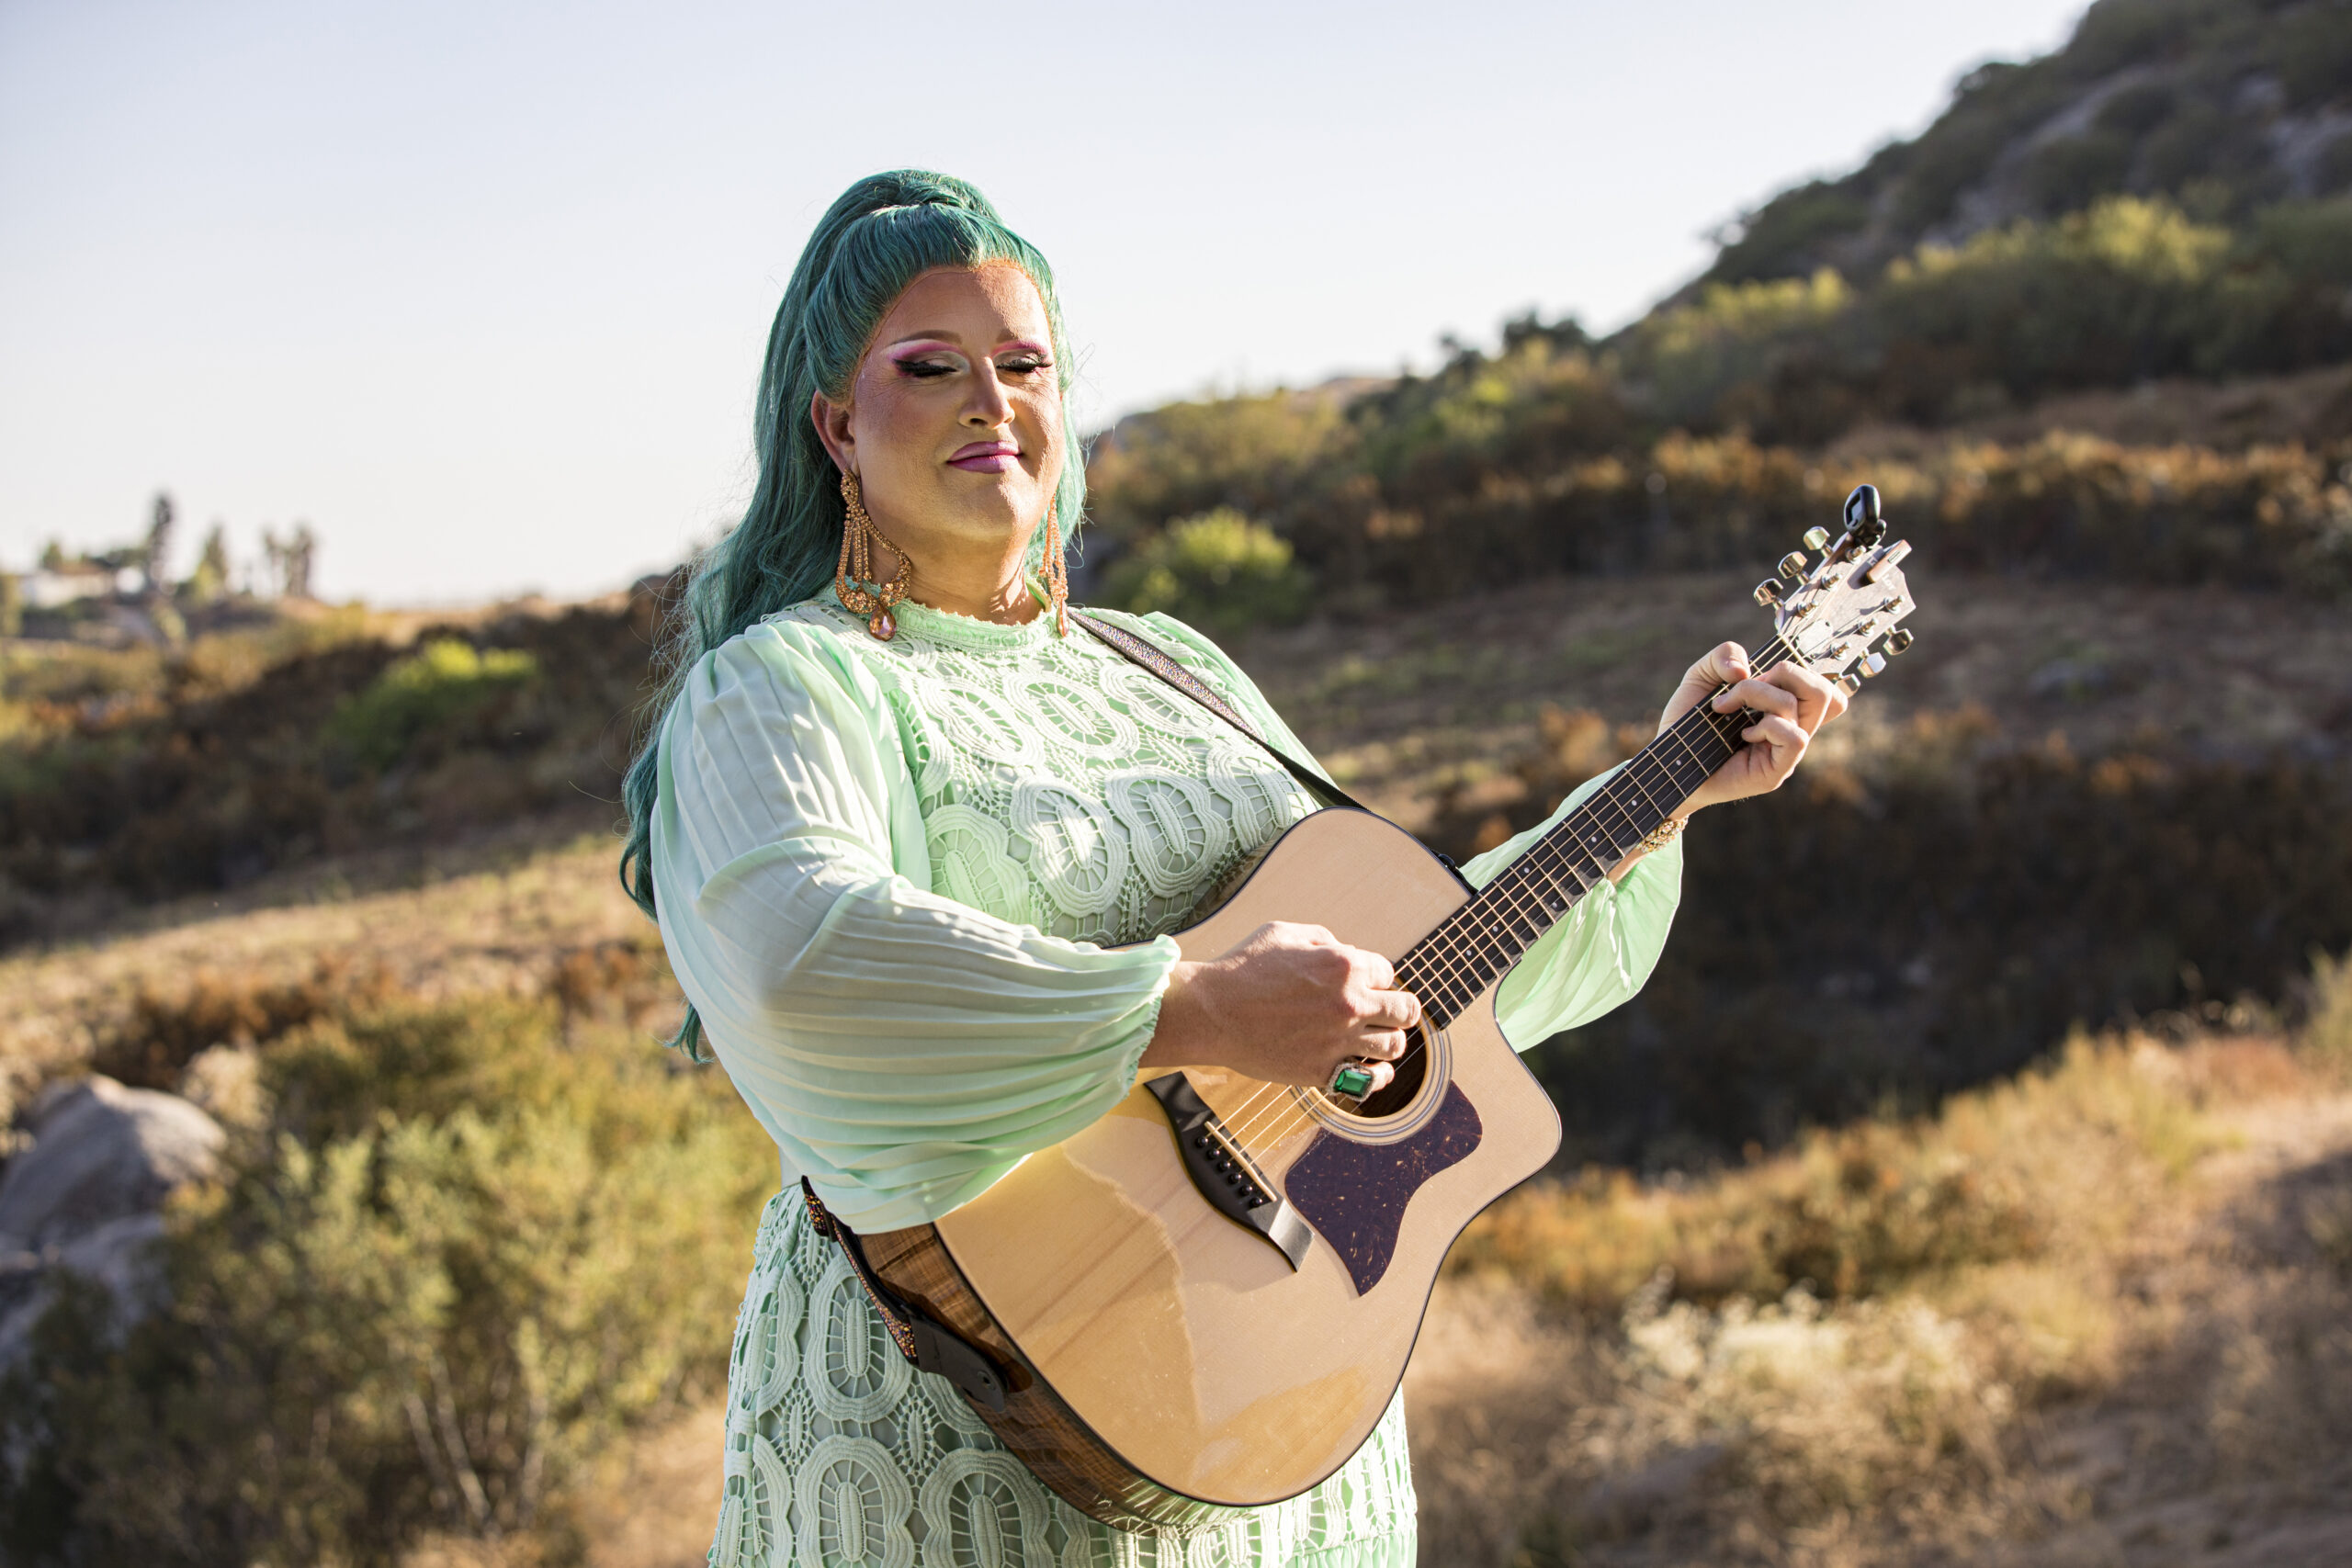 Drag performer Flamy Grant poses prior to the Songbirds of Ramona Ranch show at Ramona Ranch Winery on August 04, 2023 in Ramona, California. She has teal hair in a high ponytail, and is wearing a mint colored long sleeved, sheer dress. She is strumming at an acoustic guitar, her eyes closed.